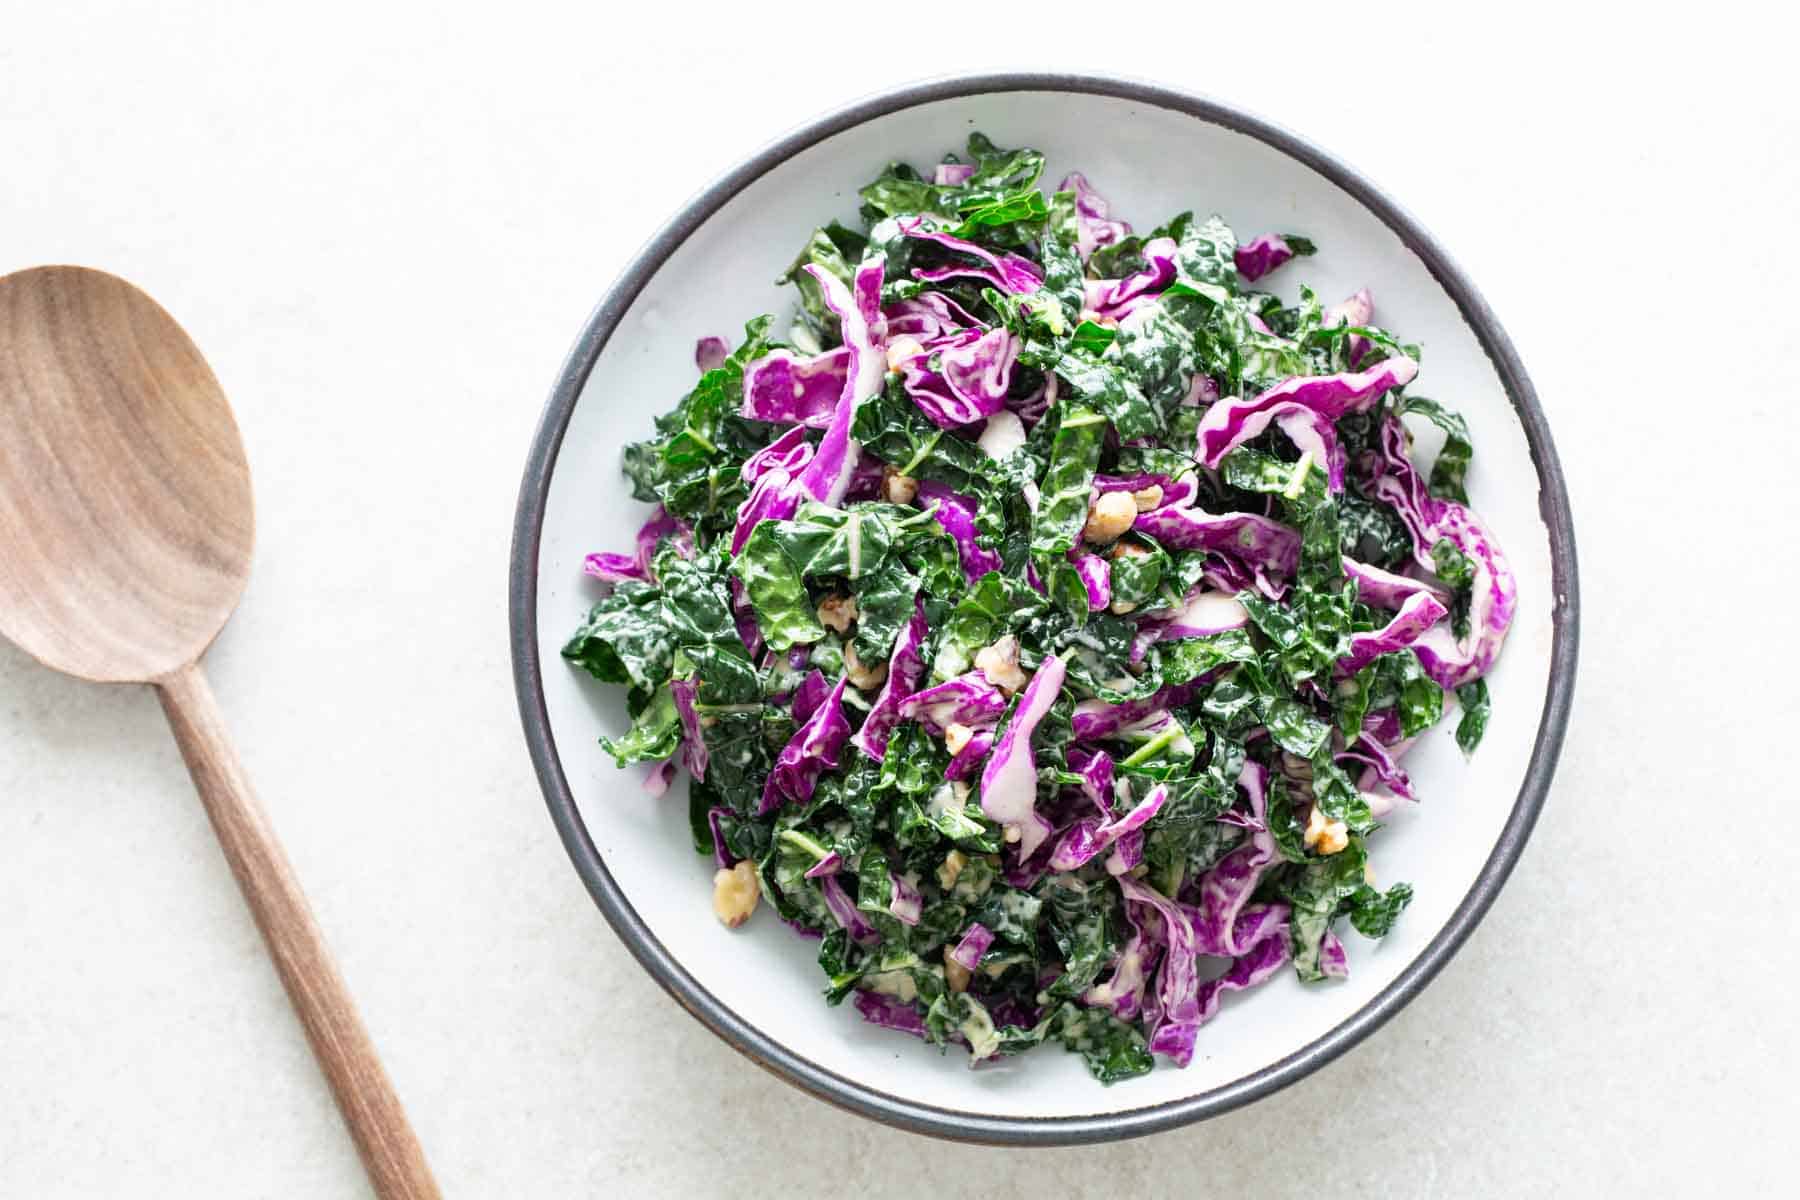 Kale slaw in a bowl with a wooden spoon.